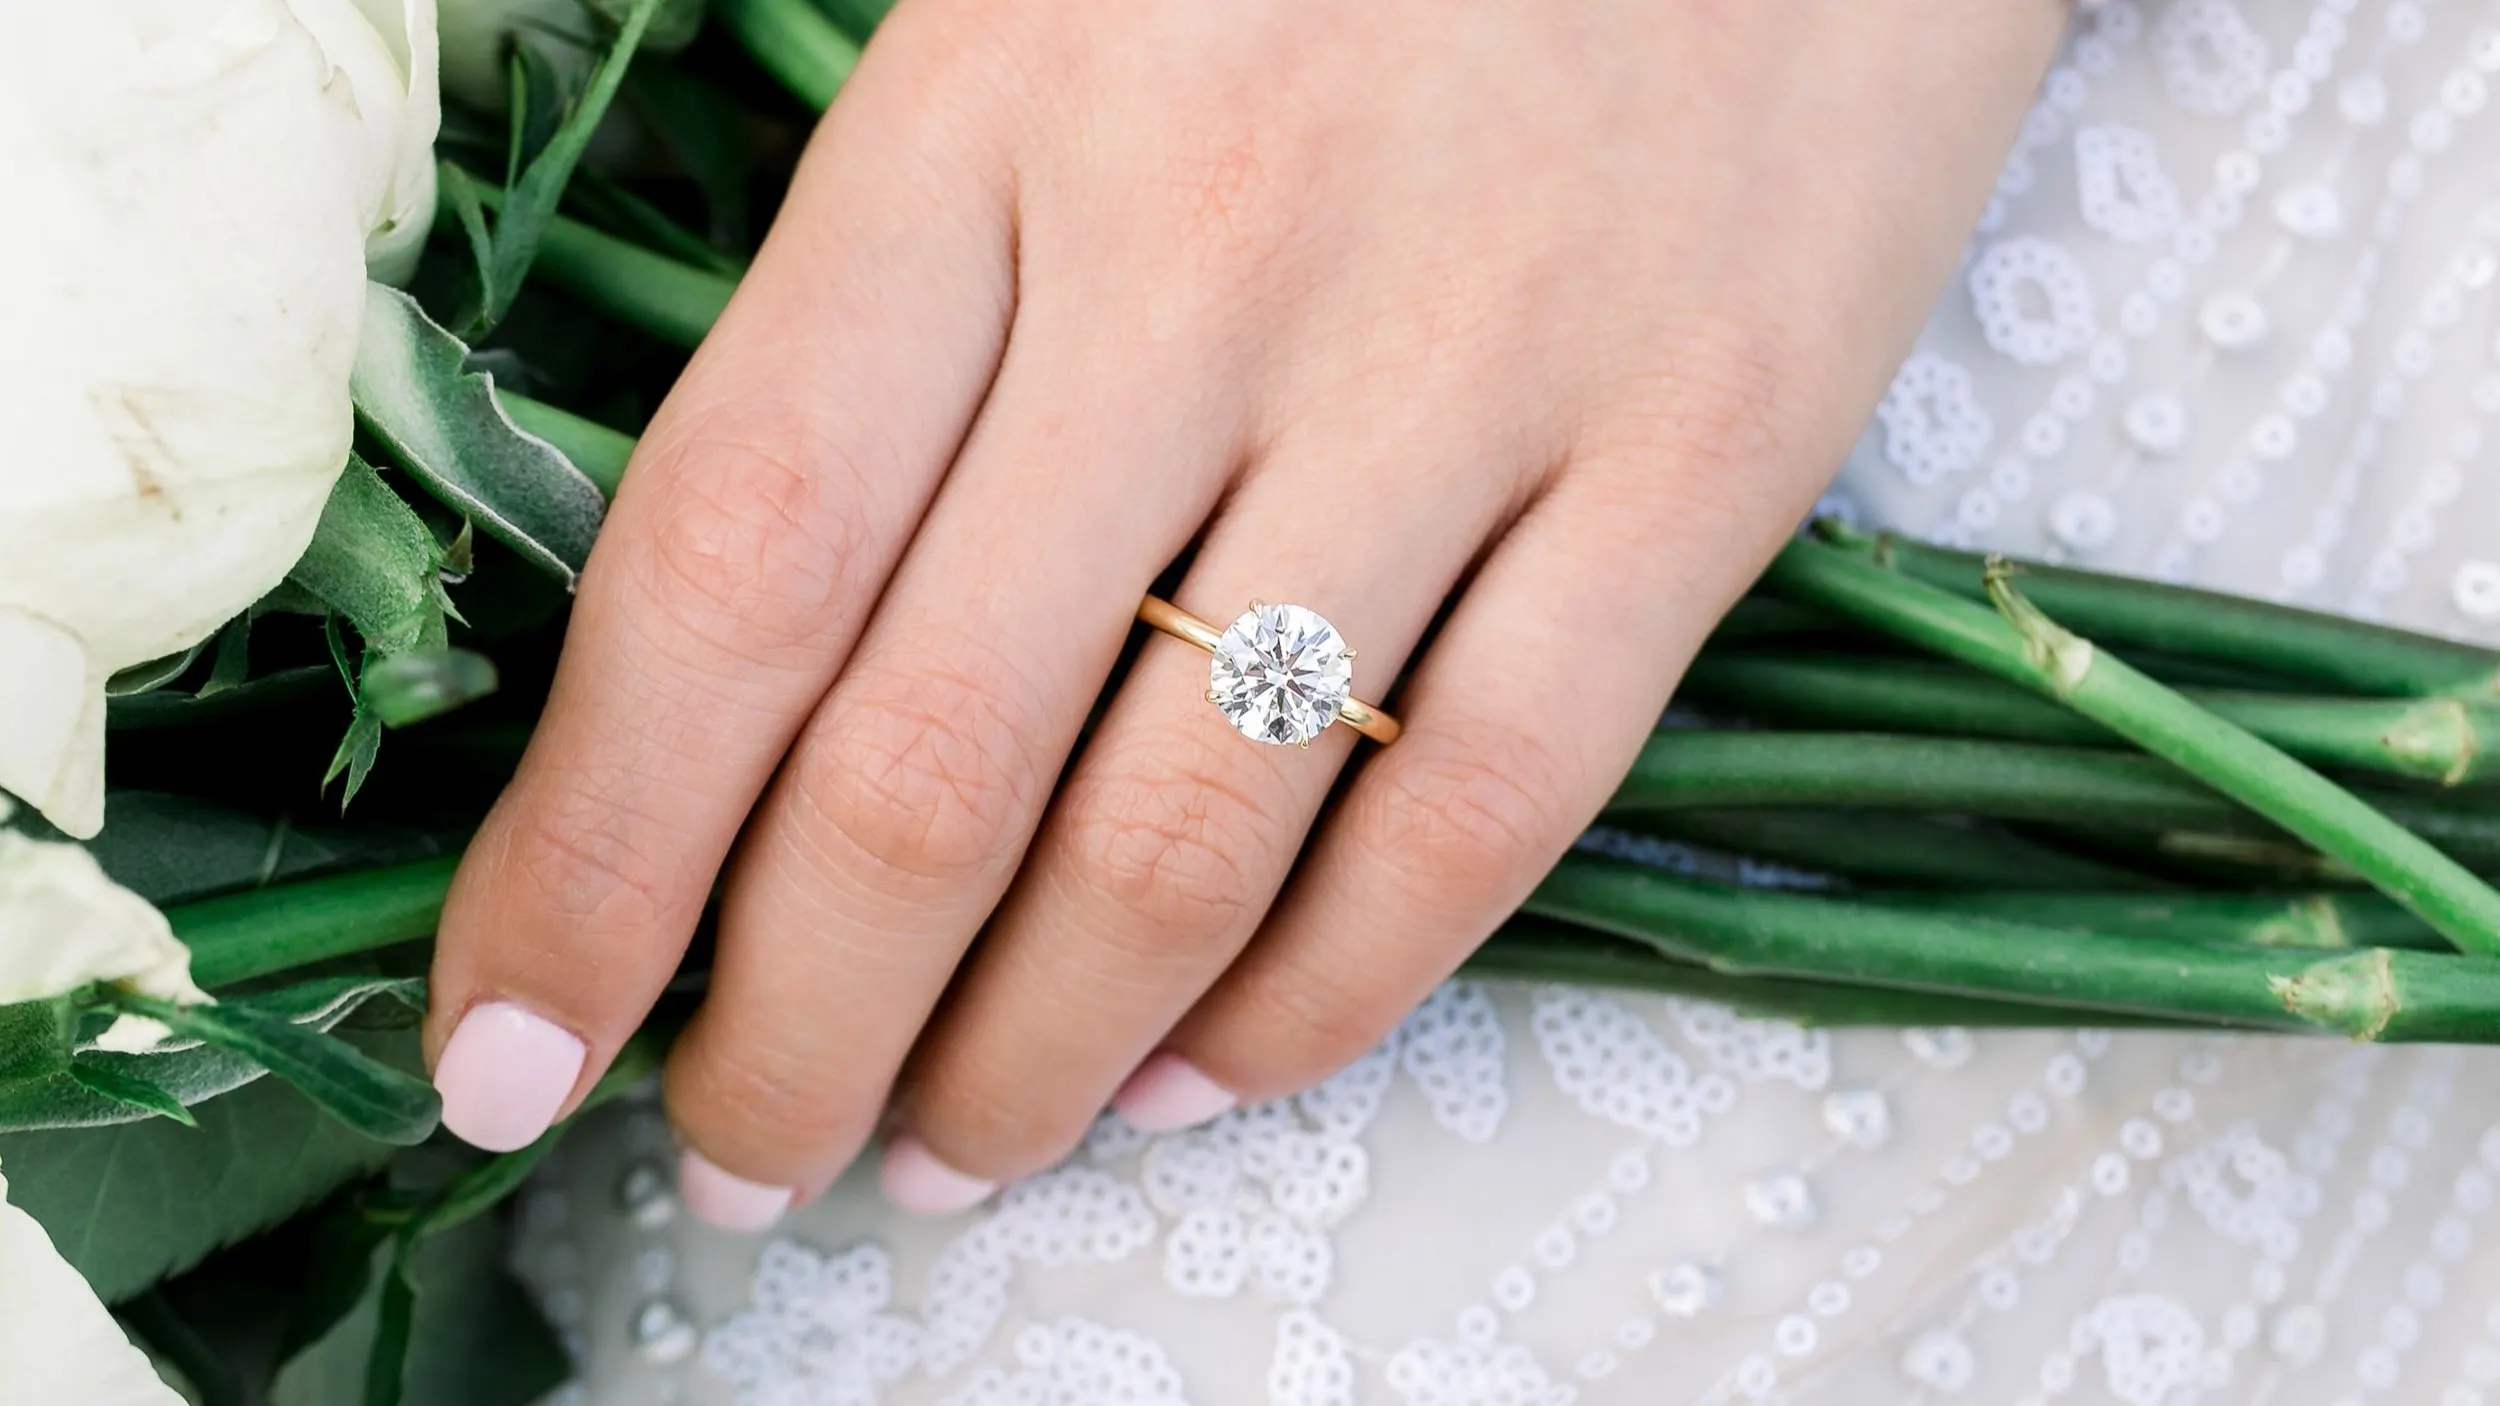 Choosing the right Vintage Ring Setting - Dover Jewelry Blog